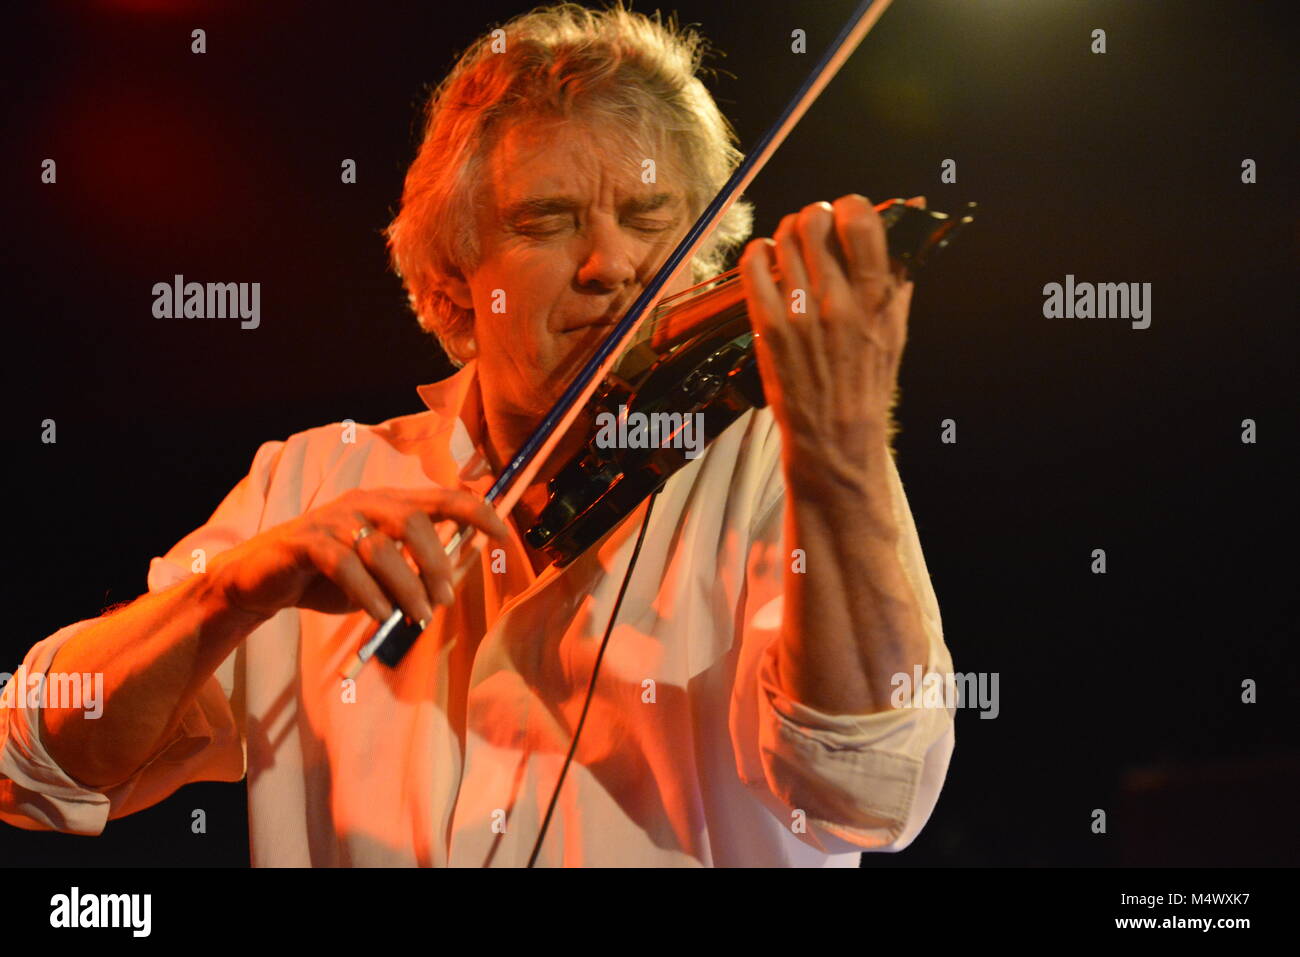 FILE: 18th Feb, 2018. Photo taken: Paris, France. 19th March 2014. Photo shows Didier performing in concert "Le Petit Journal Montparnasse in 2014". Didier Lockwood, 62, one of the most famous French jazz violinists, died of a heart attack this Sunday 18th February, announced his agent. He collaborated with the greatest, from Claude Nougaro to Barbara through Jacques Higelin or Miles Davis. Credit: Gilles Delacourd/Alamy Live News Stock Photo